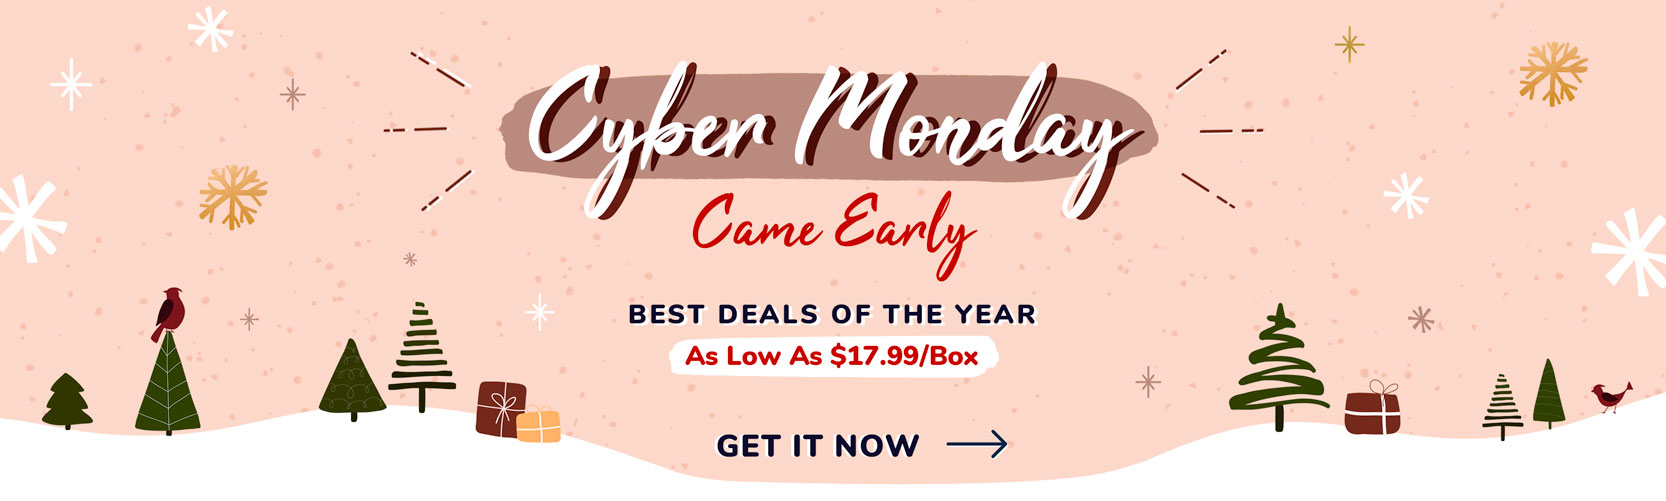 Day 10 of 12 Days of Sales: Cyber Sunday!